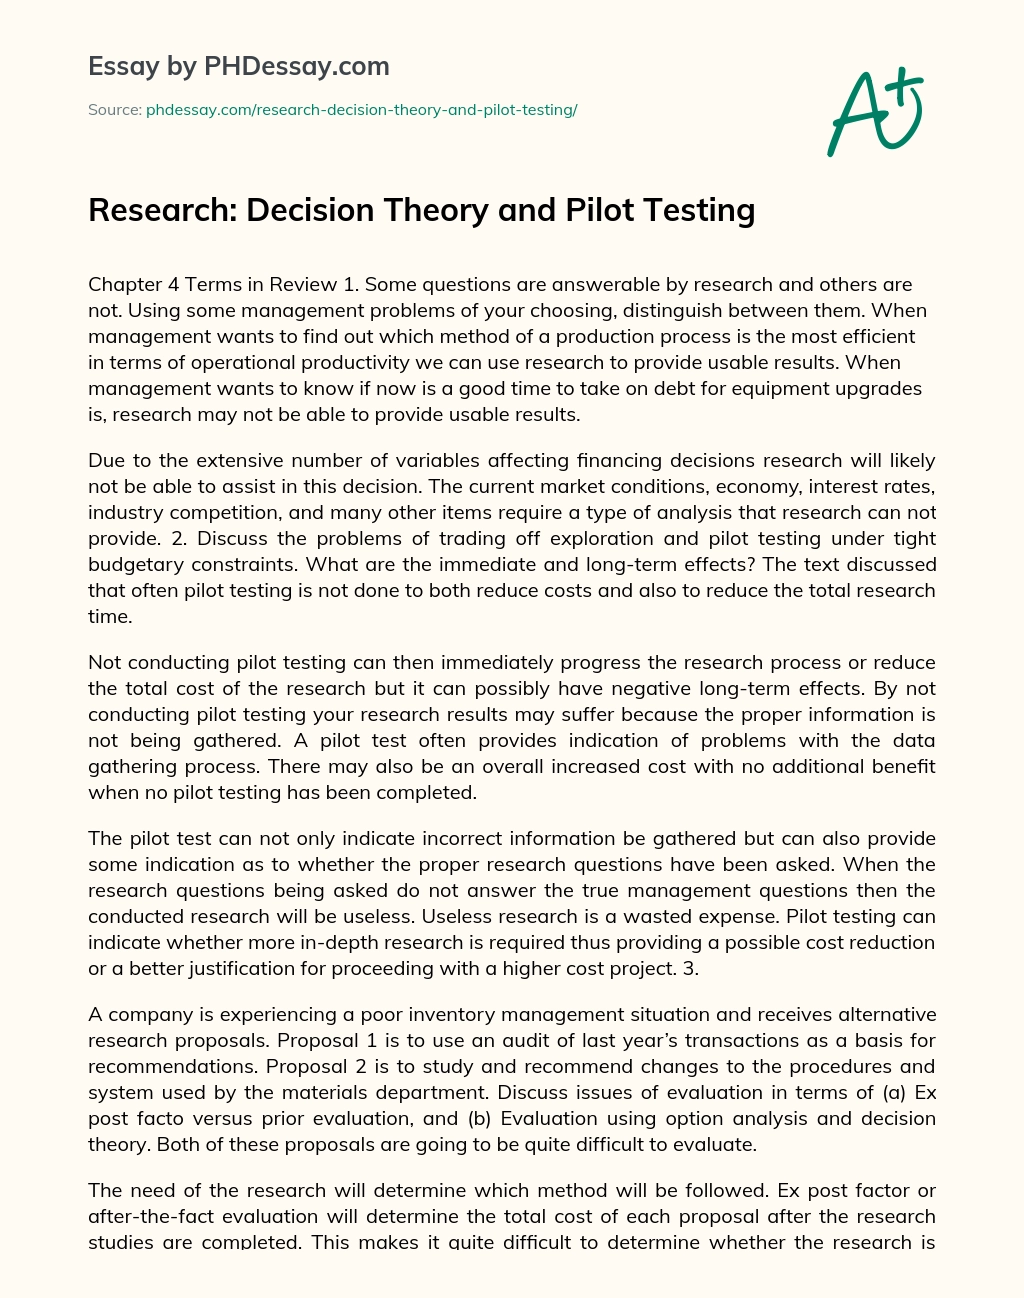 Research: Decision Theory and Pilot Testing essay